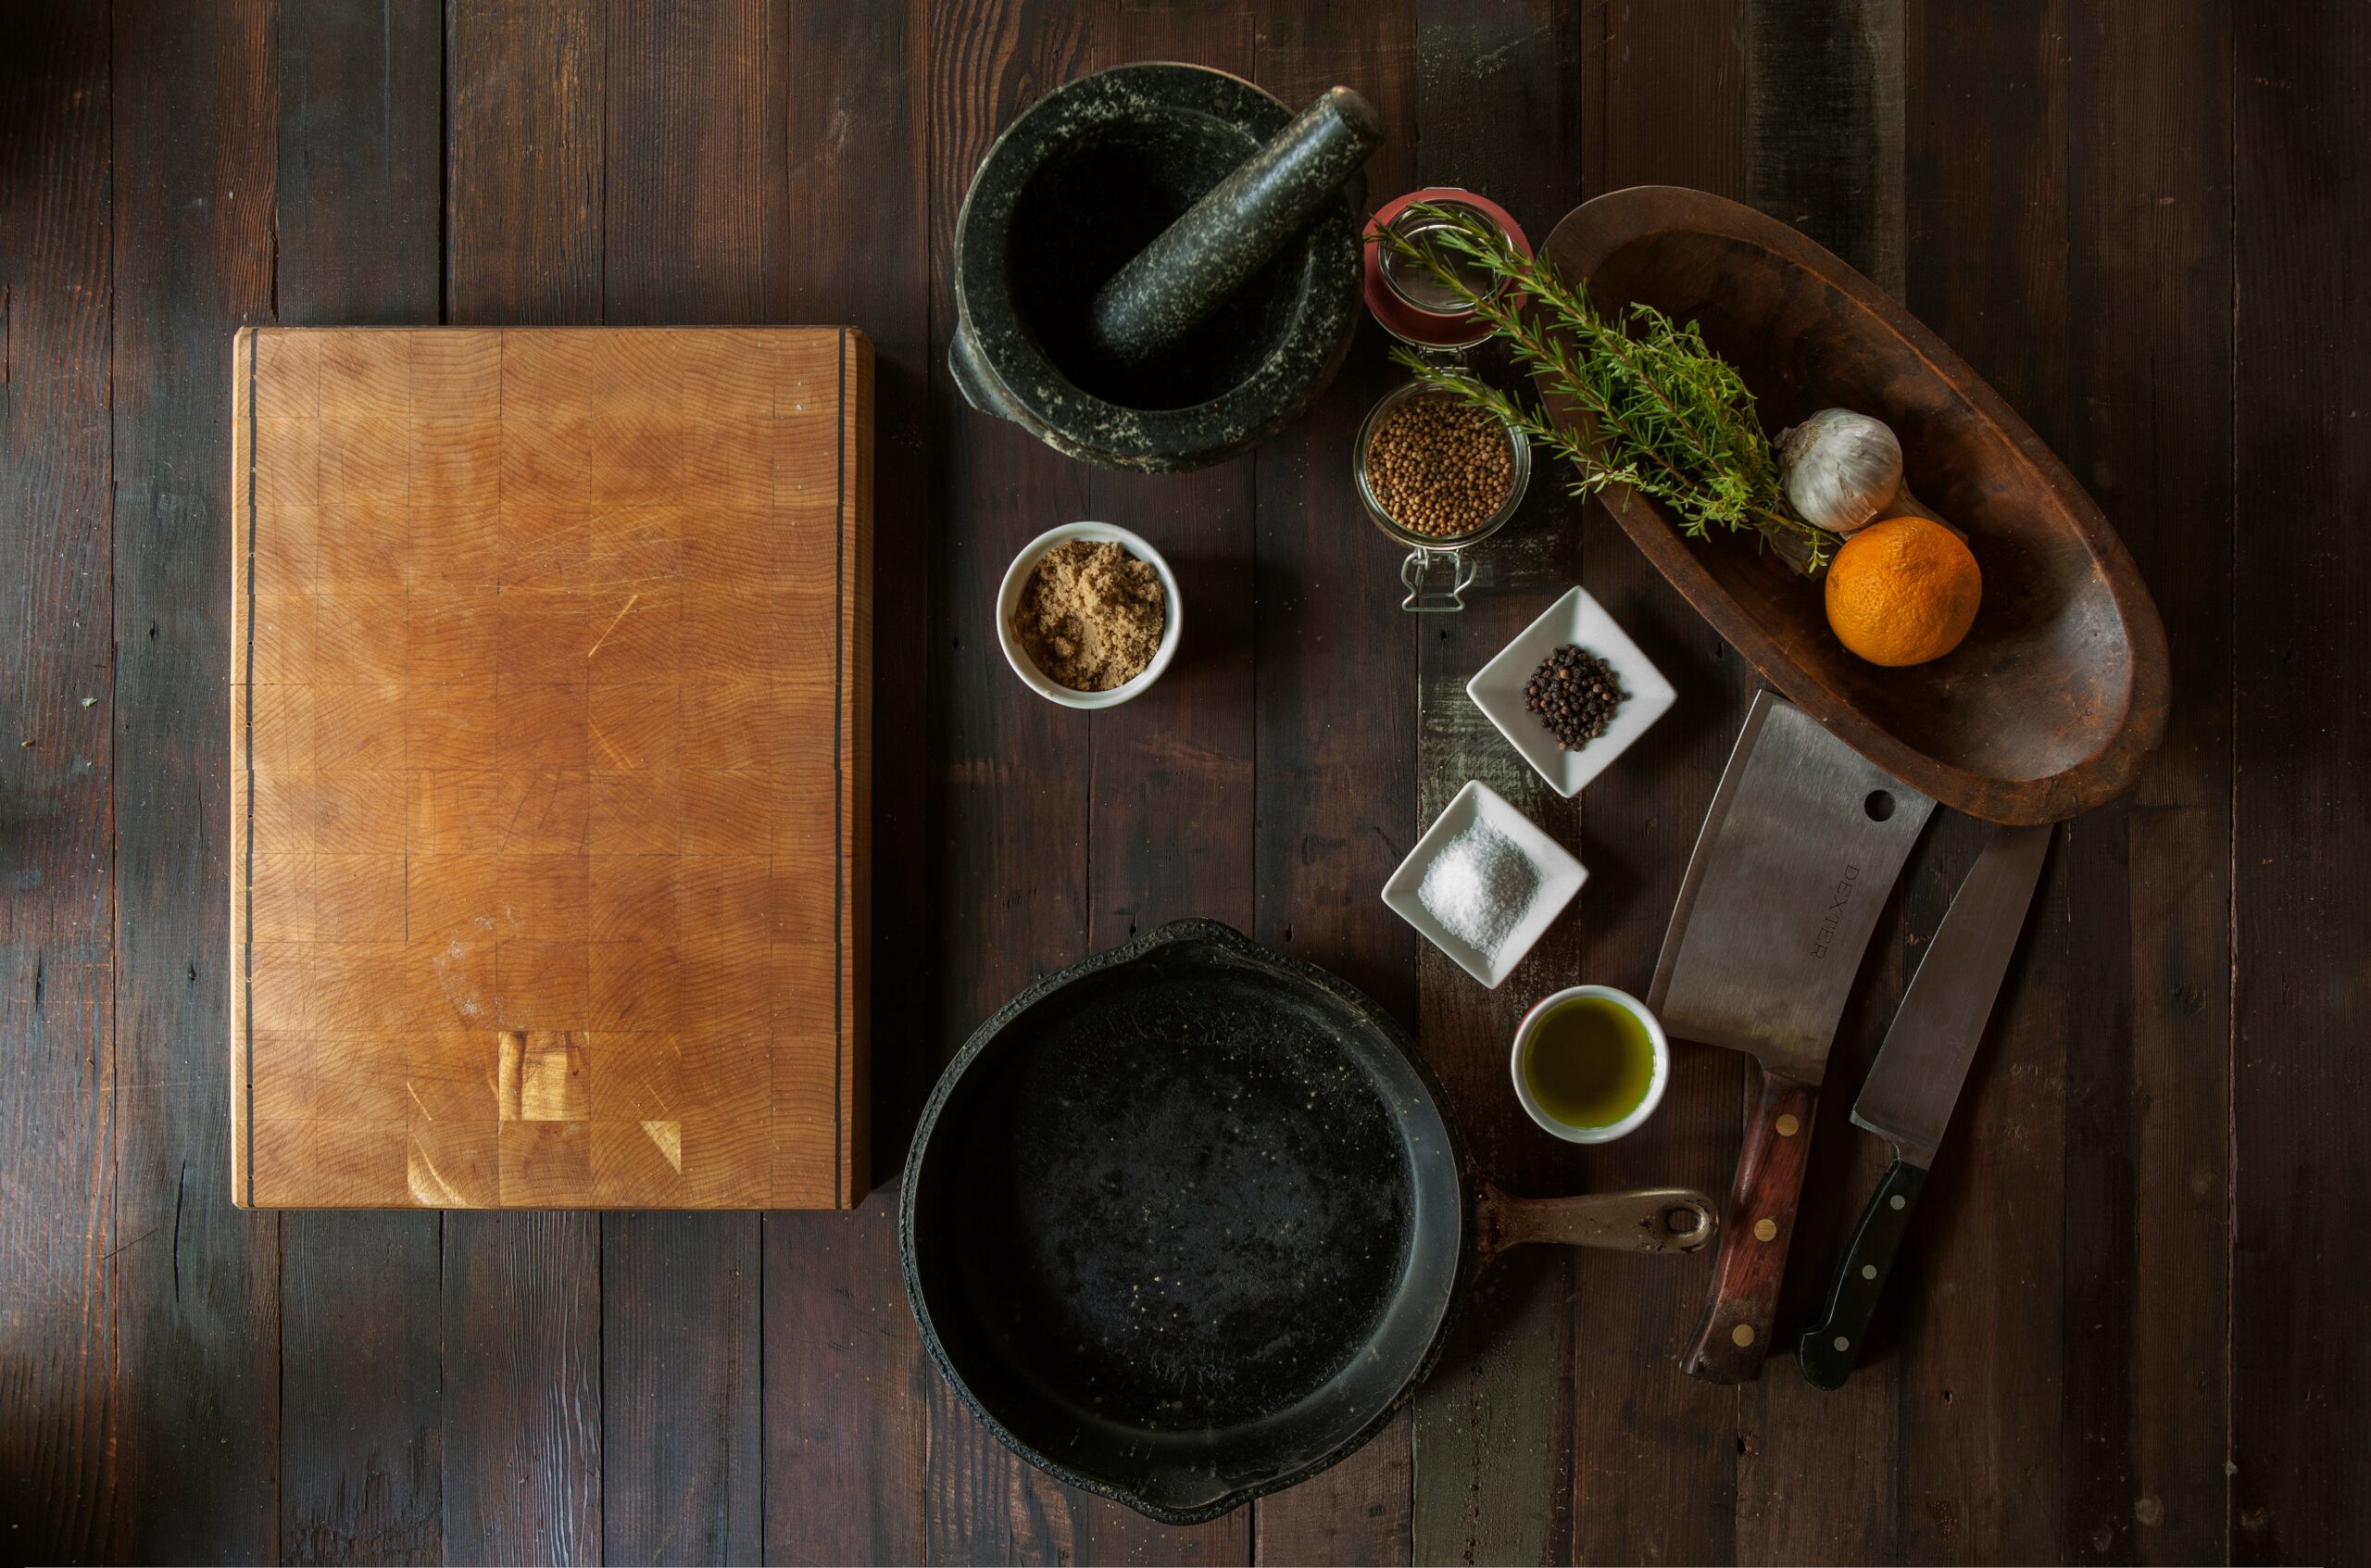 When using a cutting board, it's crucial to find one with the best materials. Here are the best types of wood cutting boards. Pictured: A cutting board with food